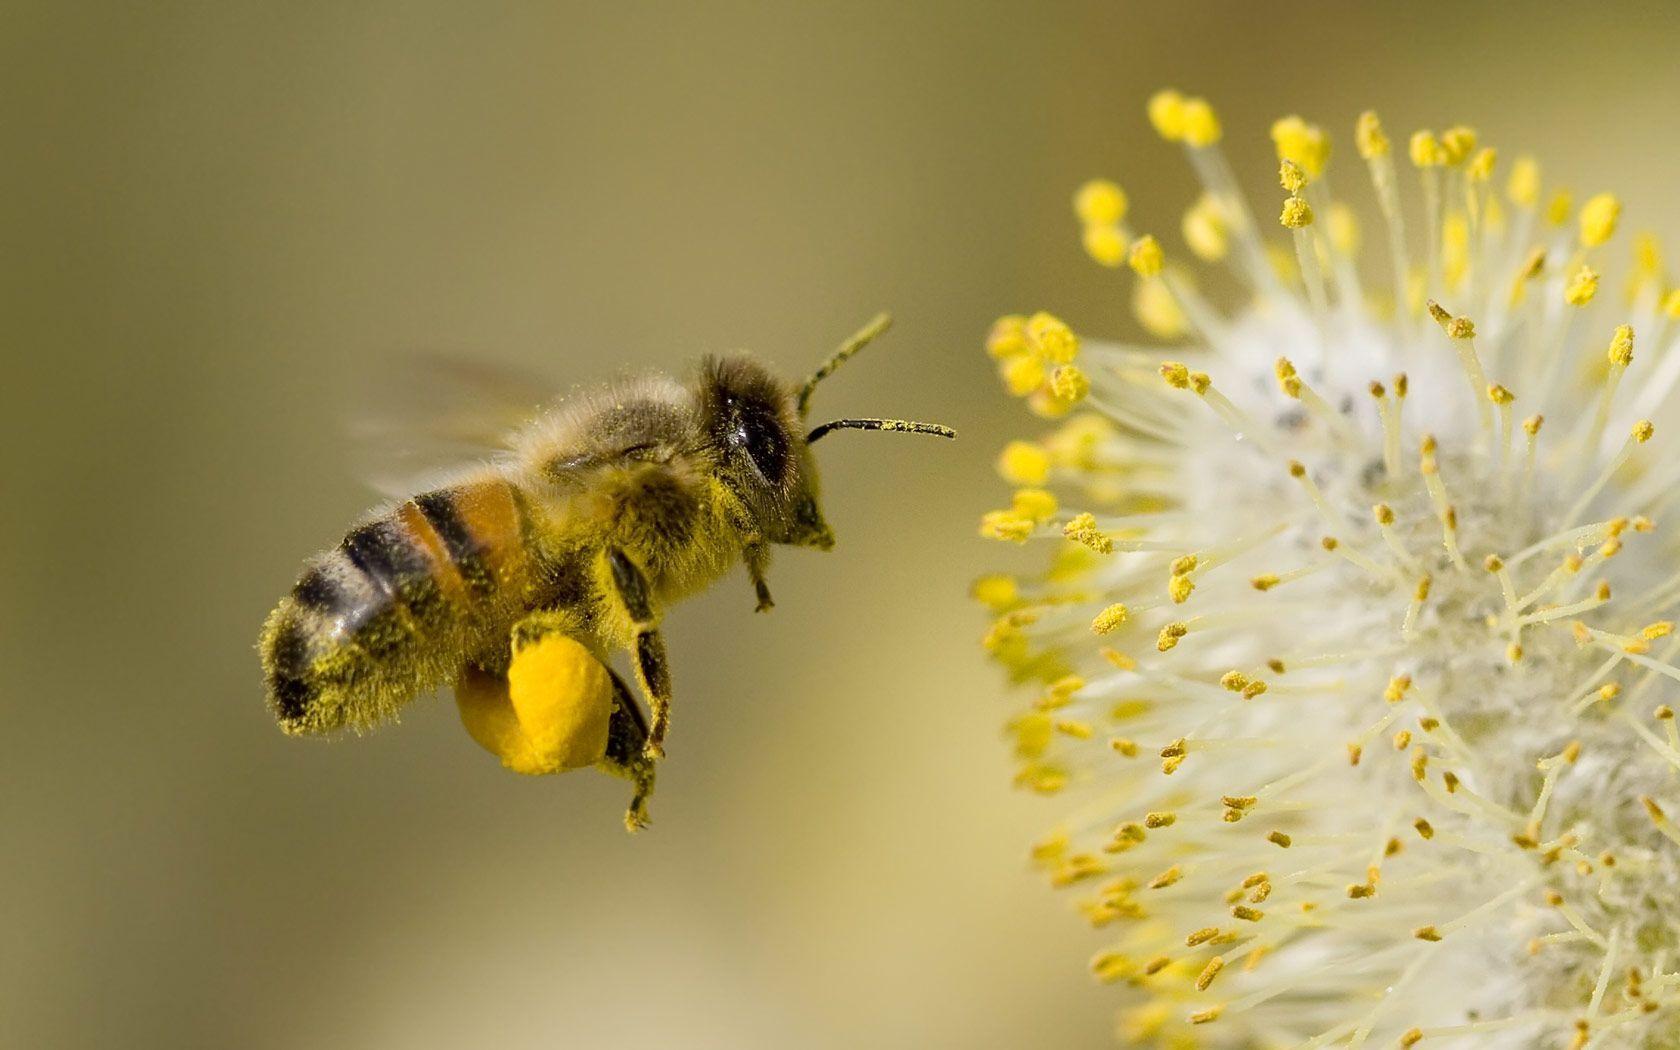 Desktop wallpaper of a worker Bee hovering while collecting pollen